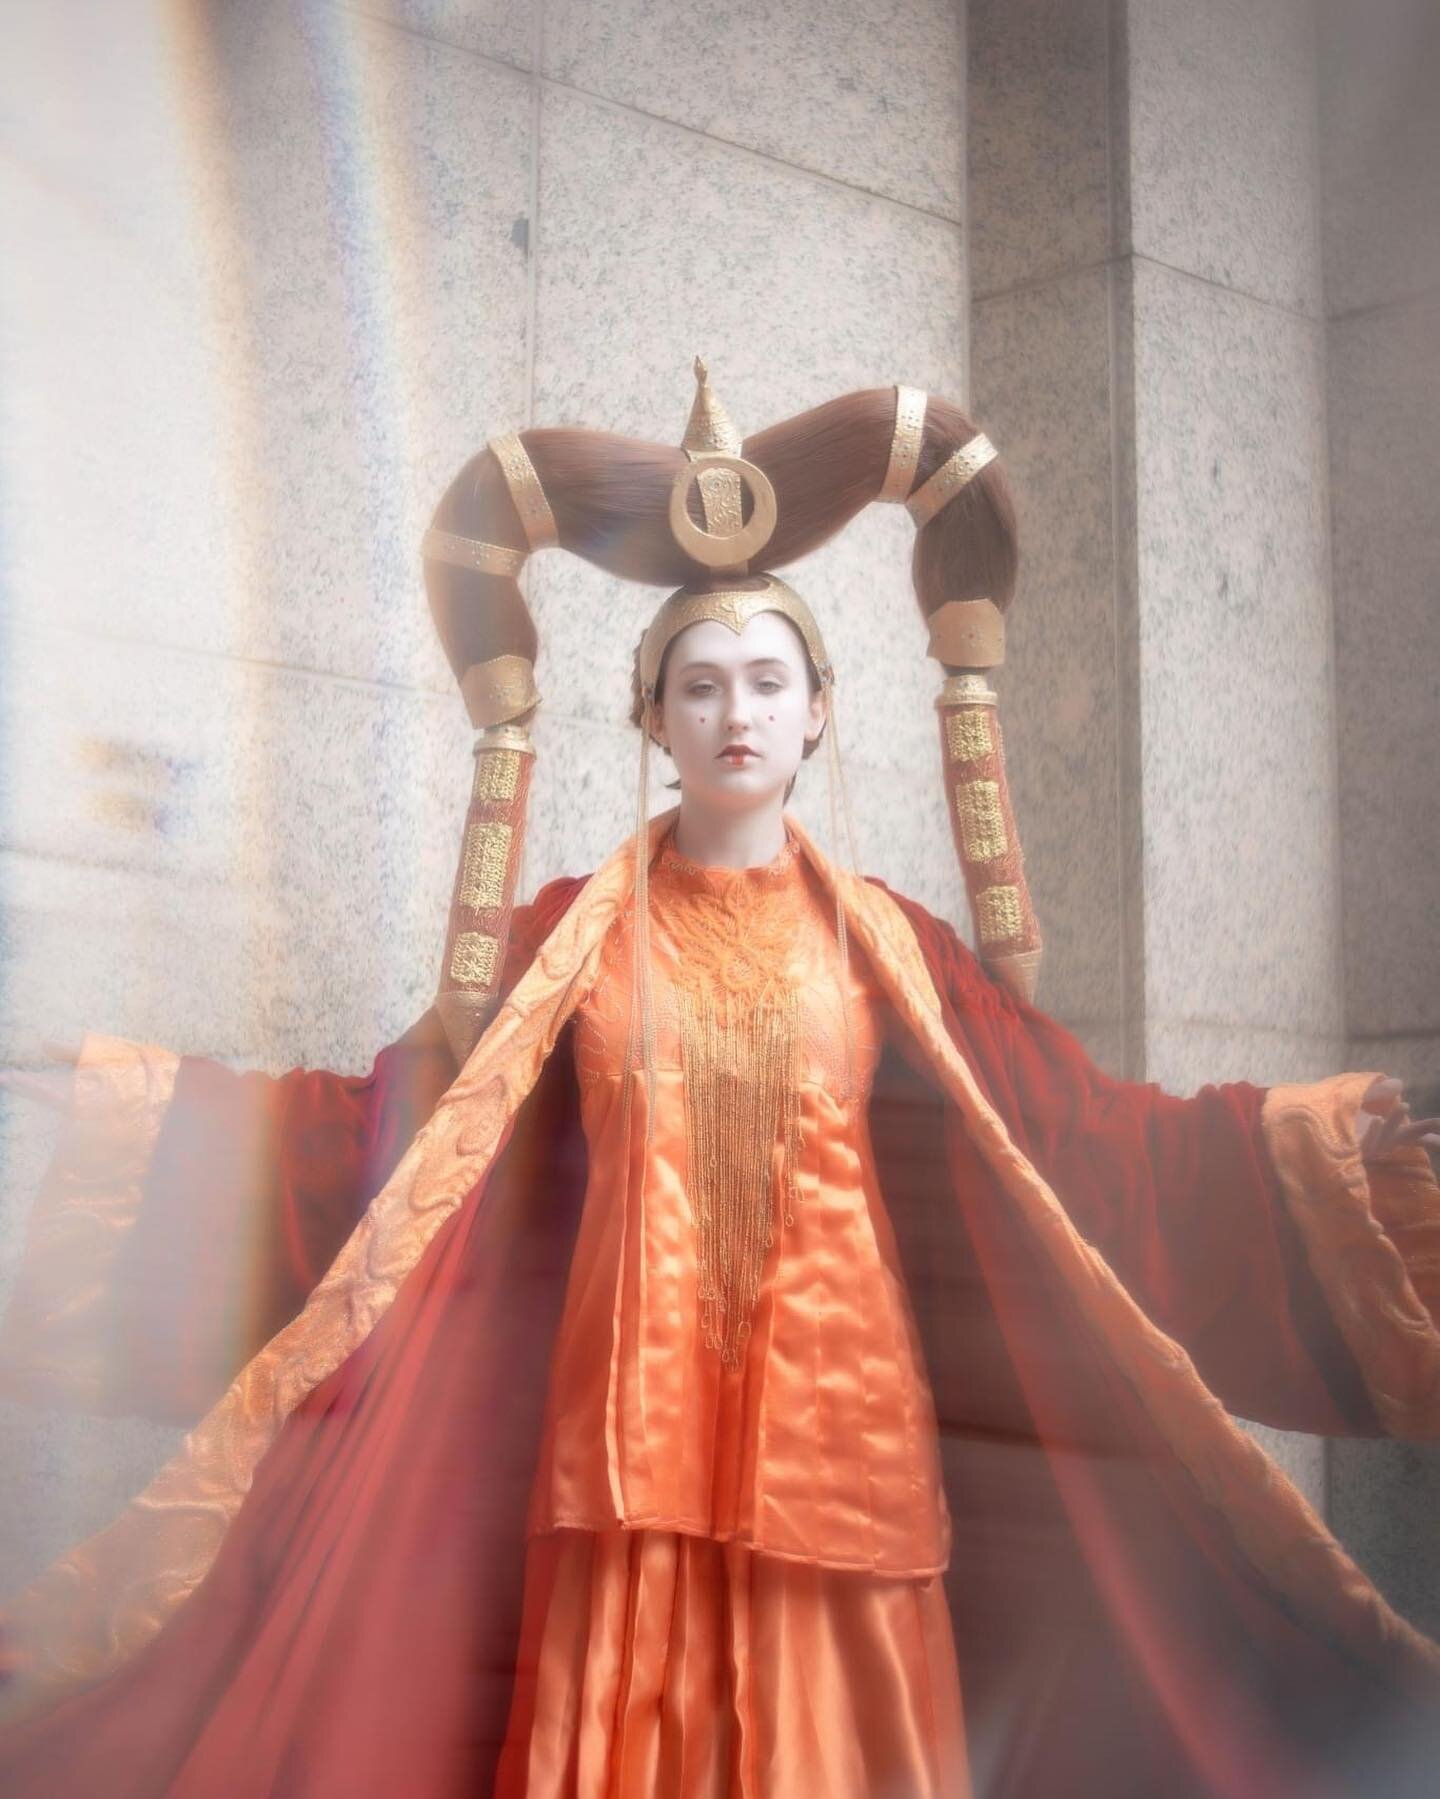 &quot;I am Queen Amidala of the Naboo. I come before you in peace.&quot;
Photos by @lostflowersandphotos 
#maythe4thbewithyou #starwars #cosplayer #may4th